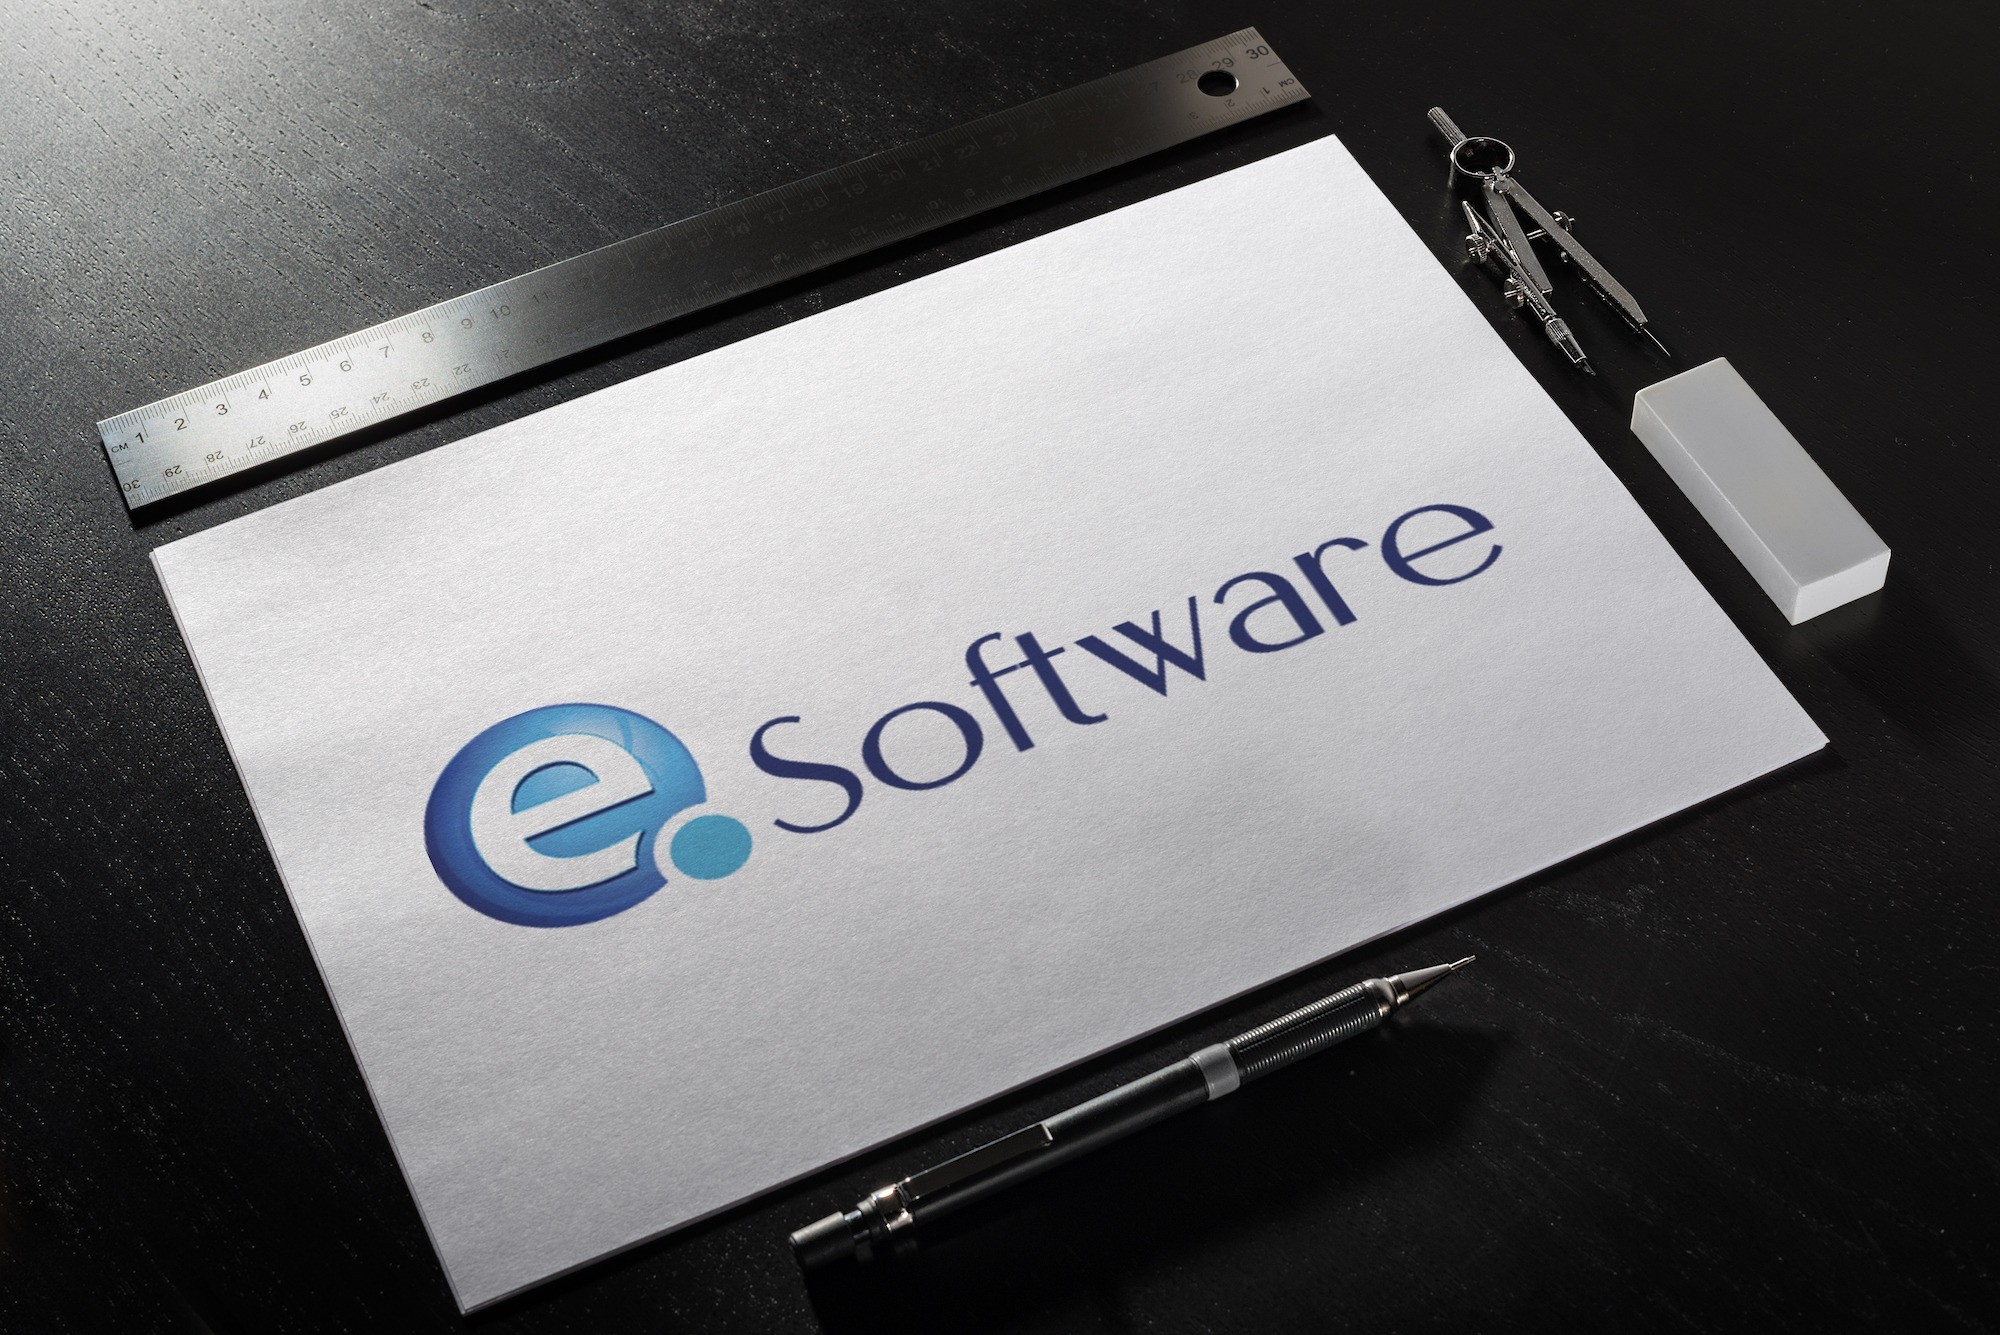 An image of the EQ Software logo on a sketch pad.